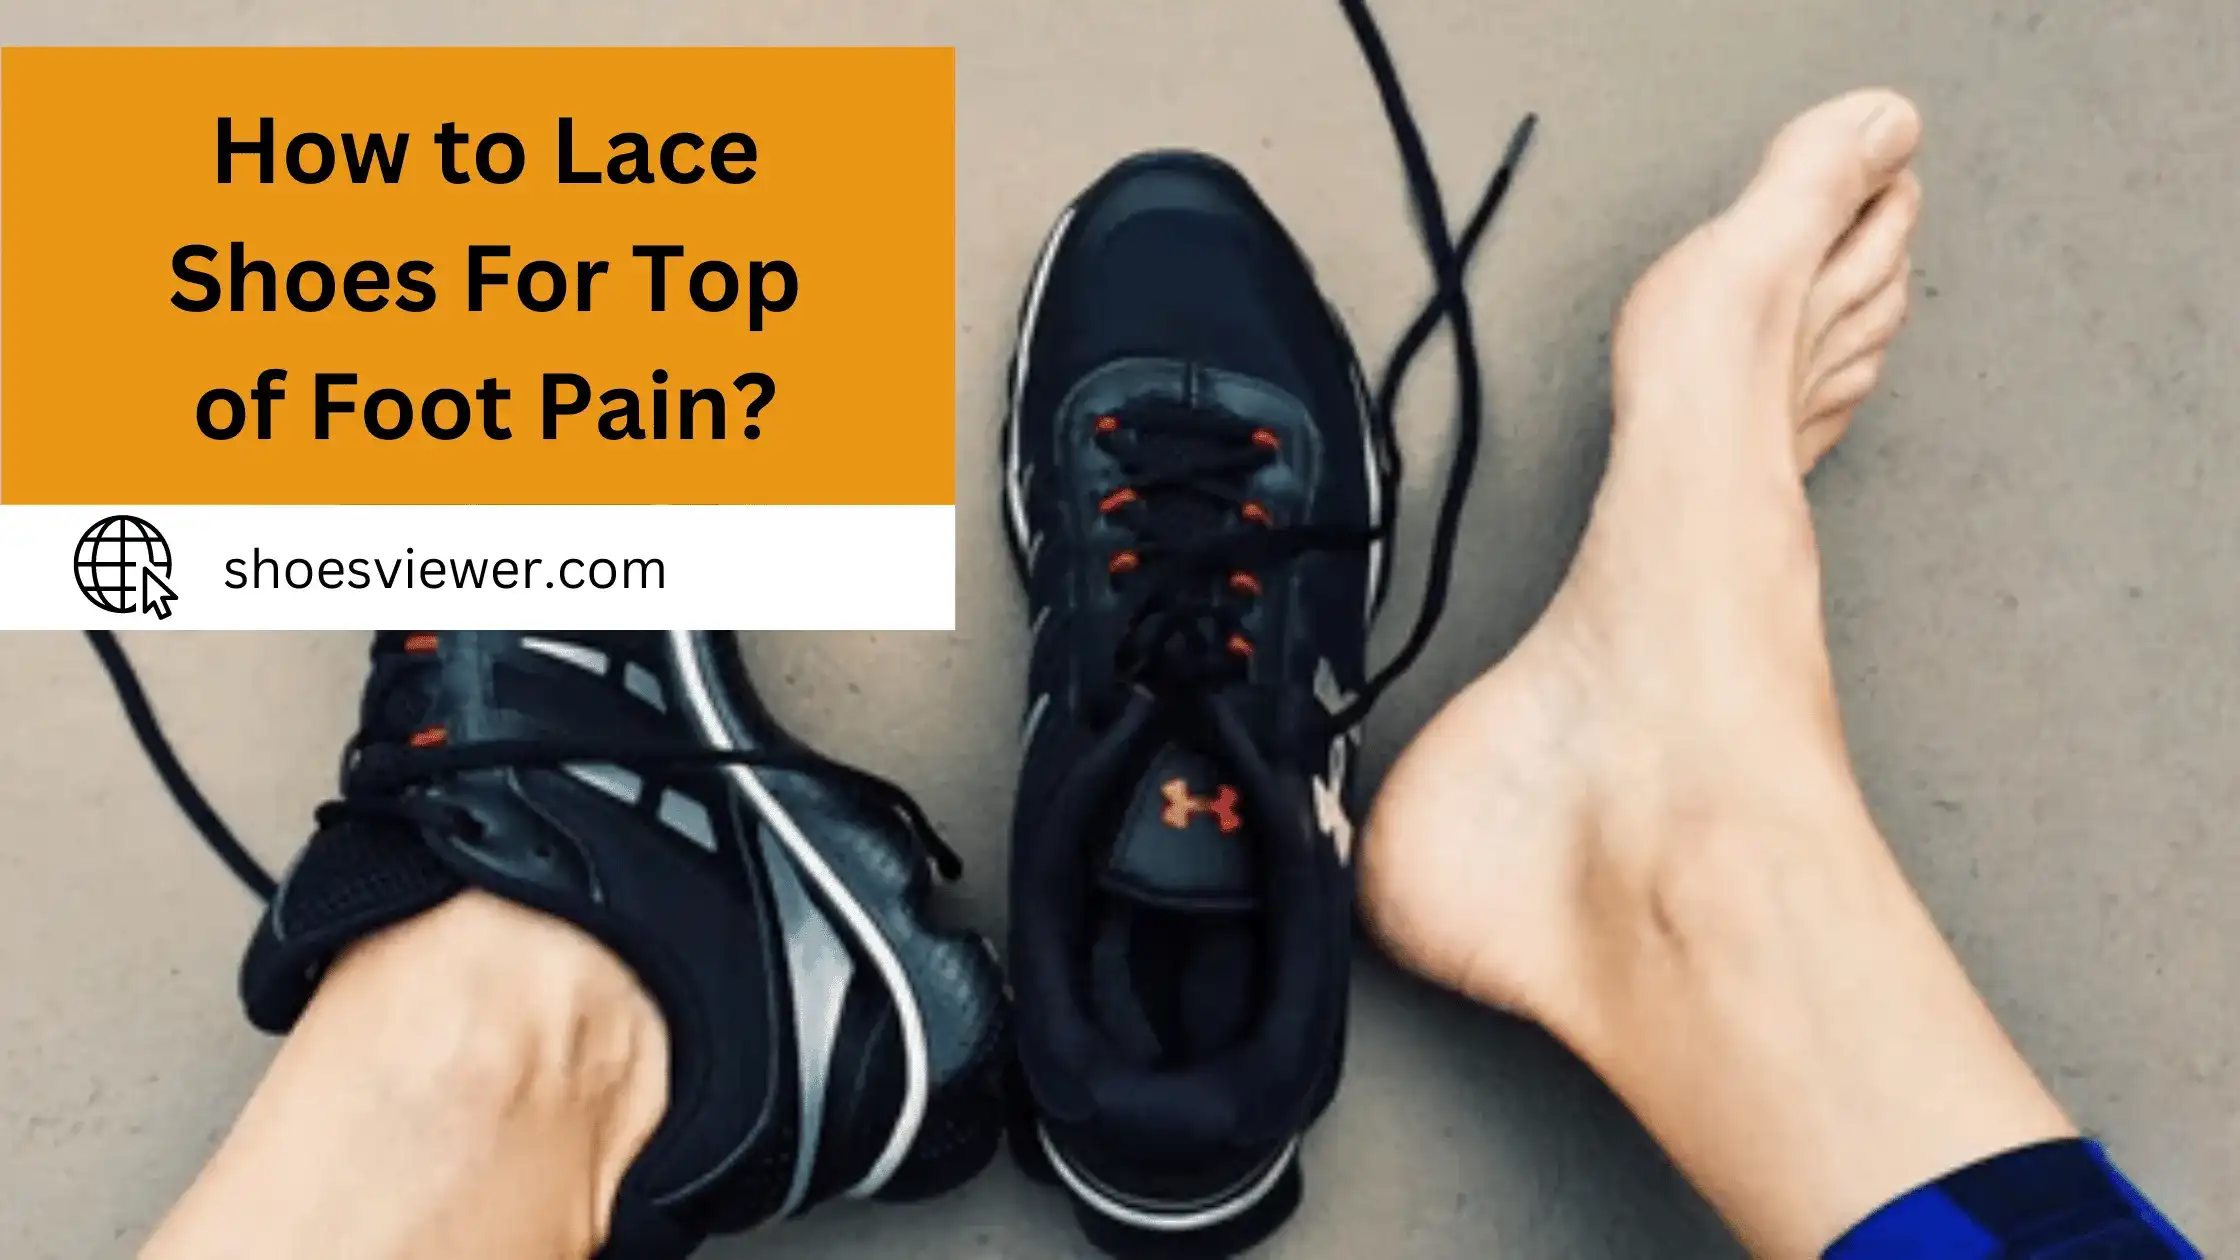 How to Lace Shoes For Top of Foot Pain? Quick Solutions!